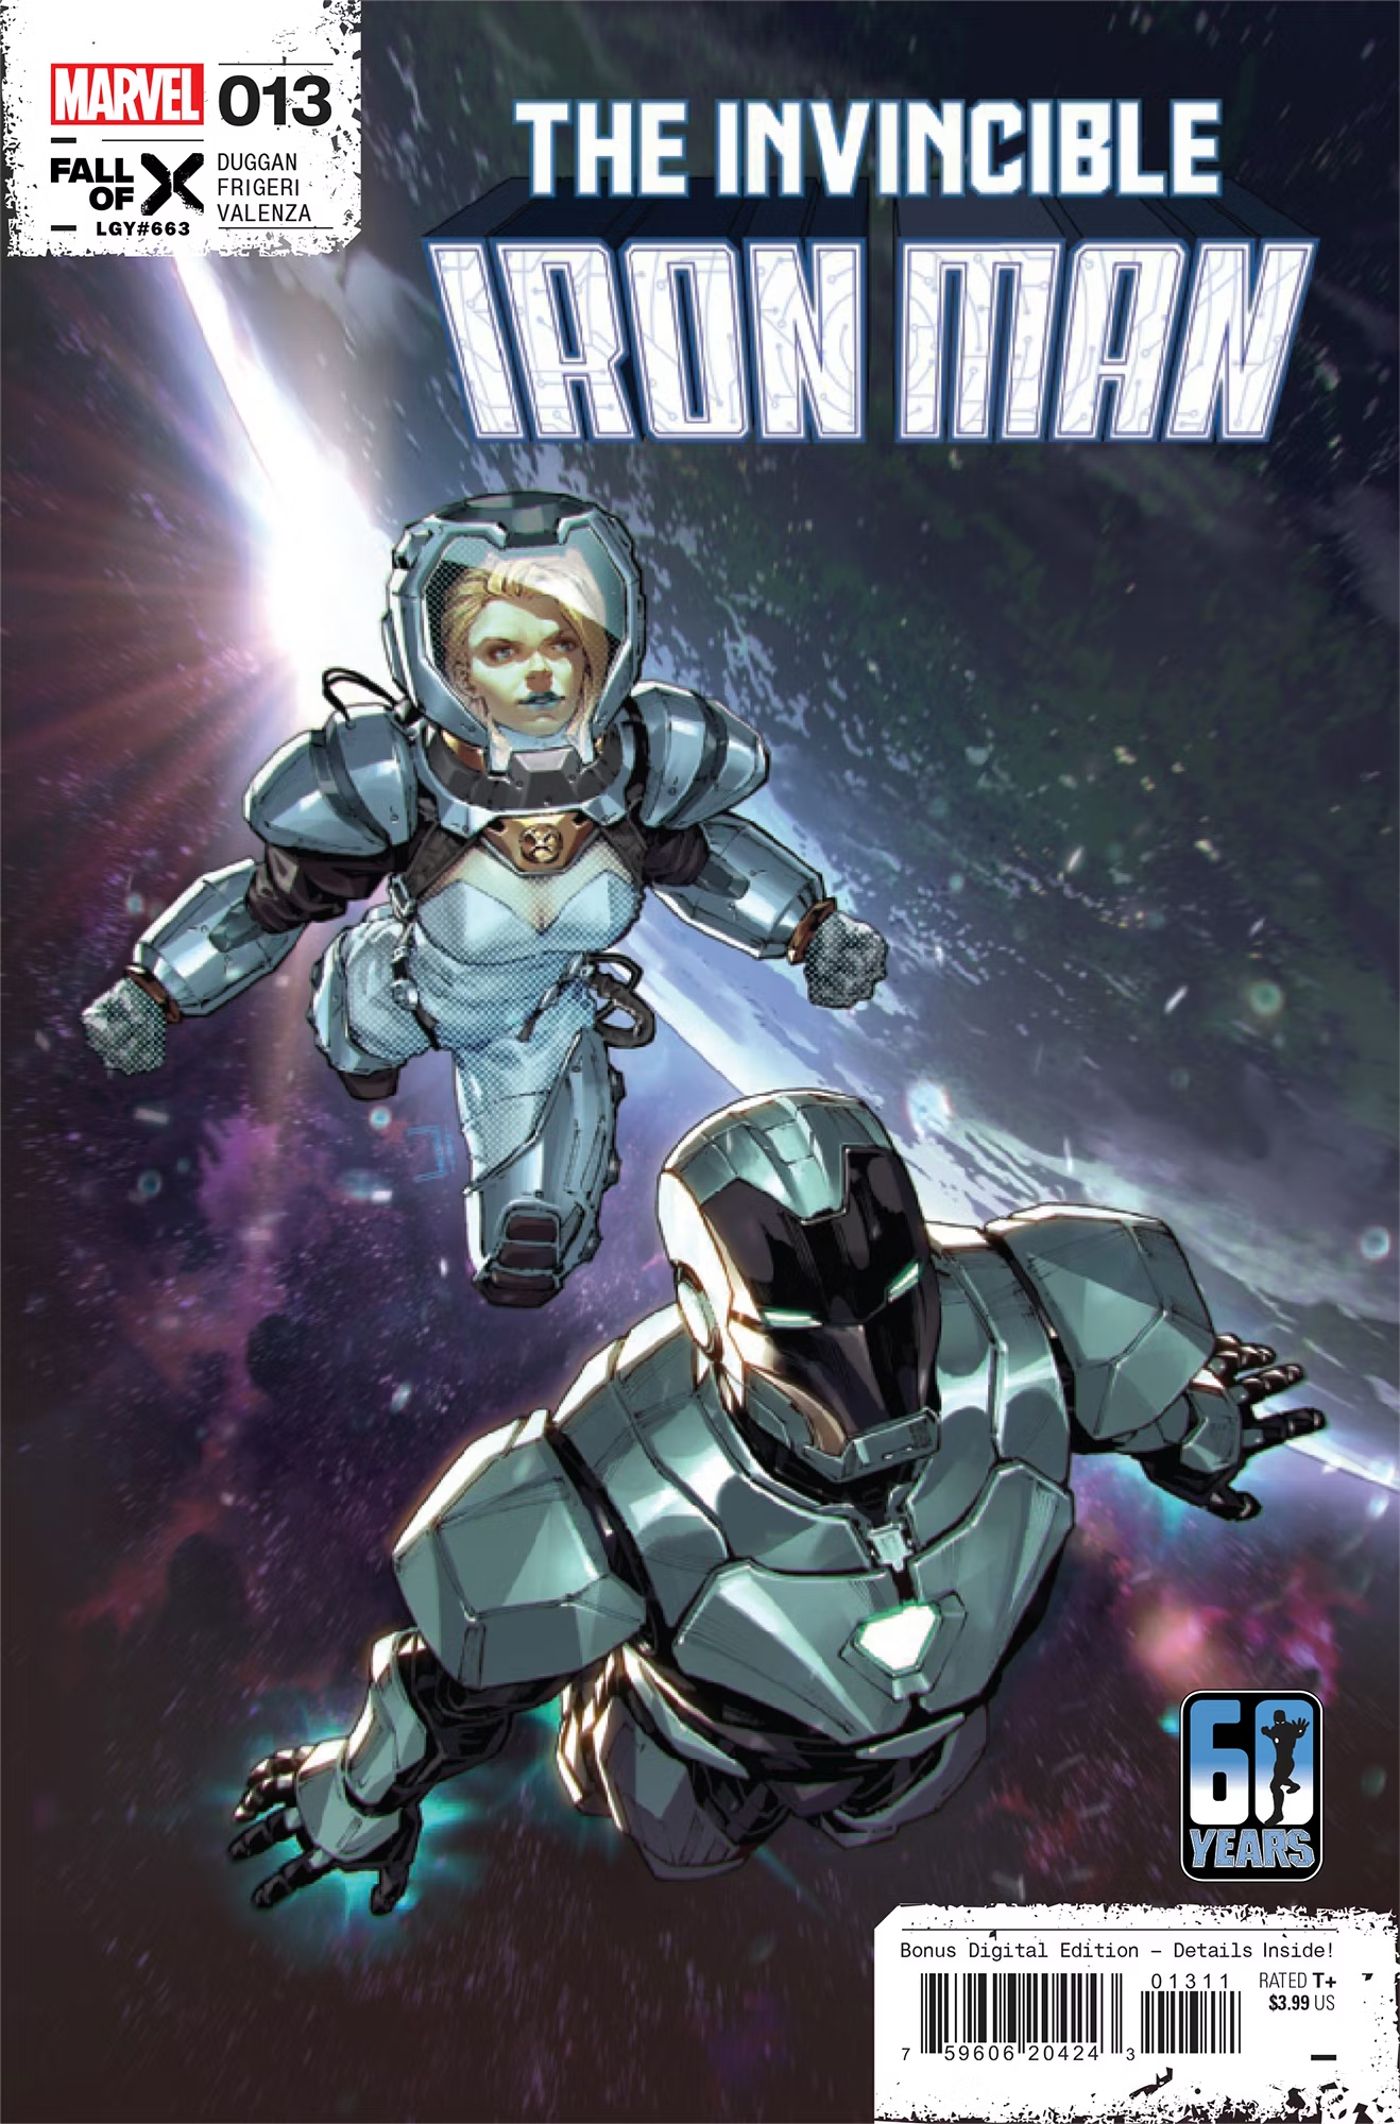 Cover for Invincible Iron Man #13, Iron Man & Emma Frost travel through space